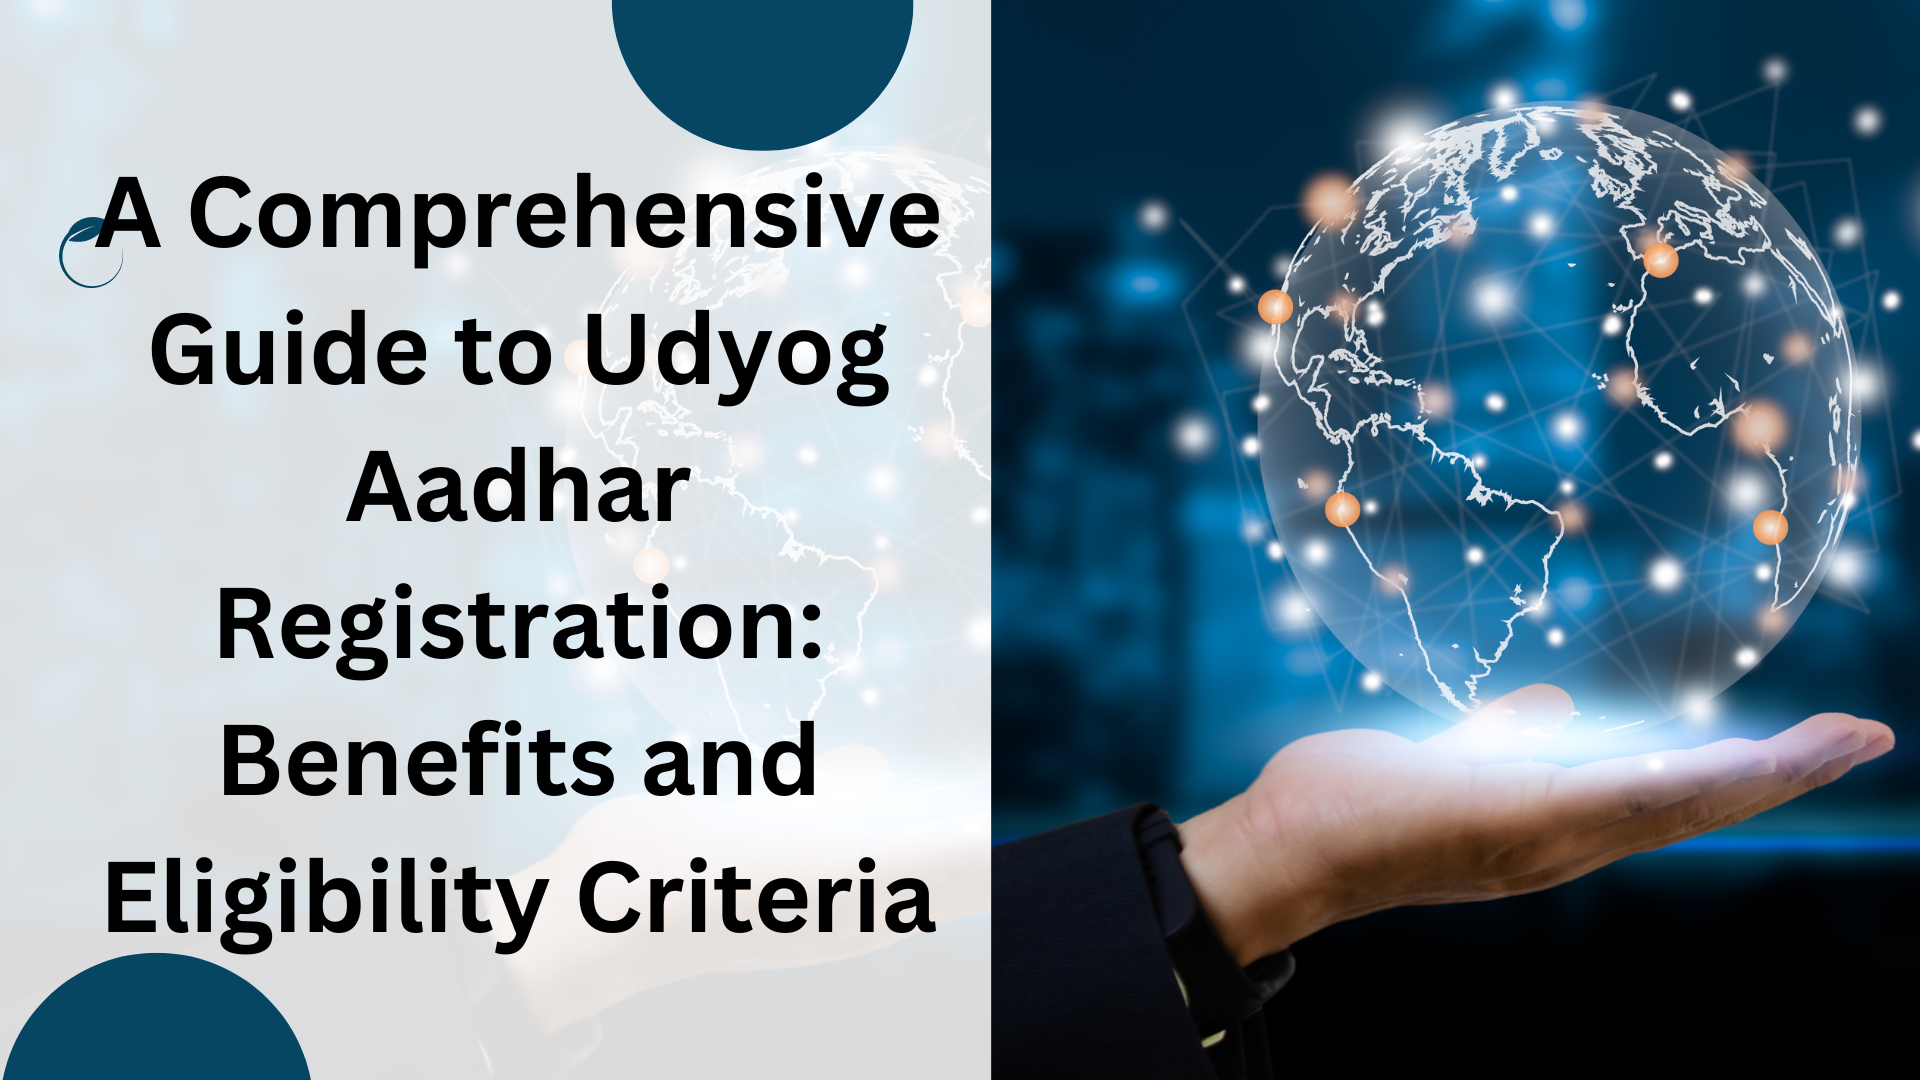 A Comprehensive Guide to Udyog Aadhar Registration Benefits and Eligibility Criteria